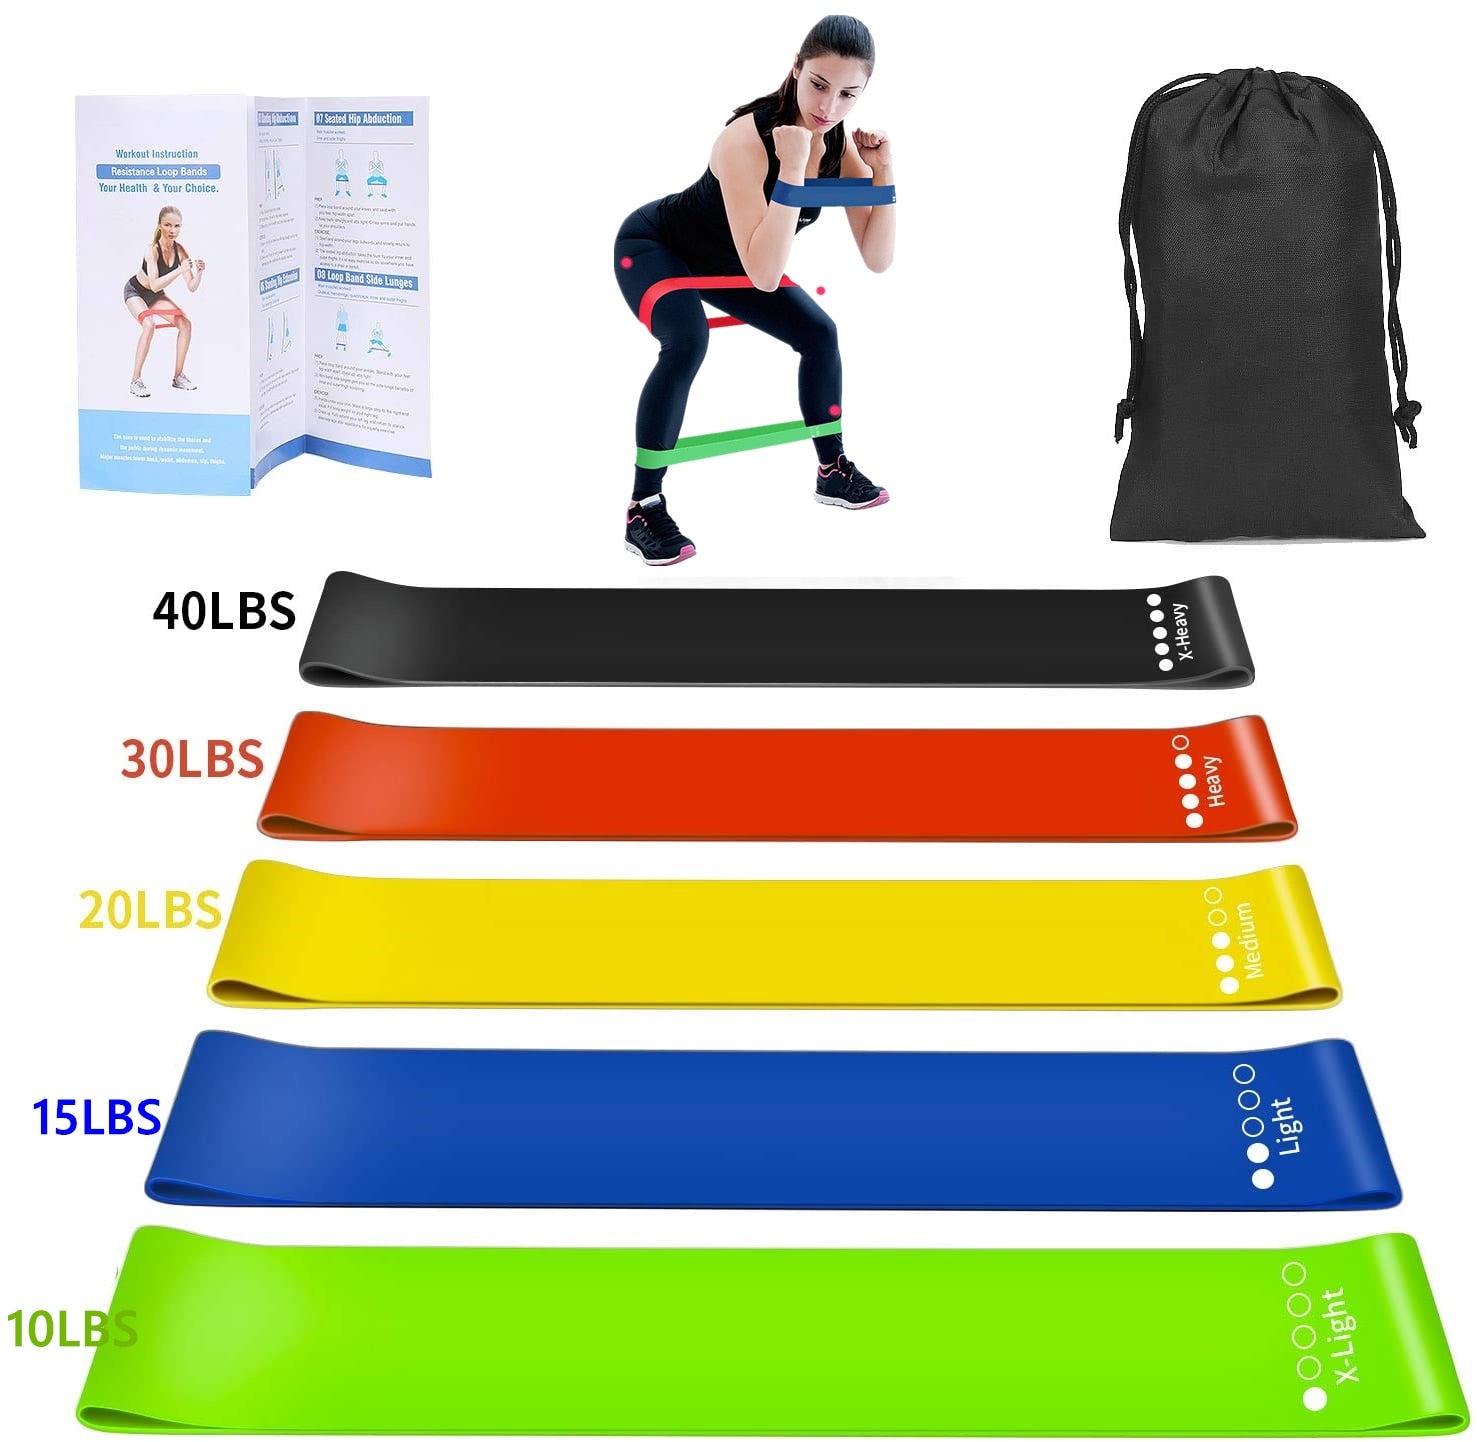 Training Fitness Exercise Gym Strength Resistance Loop Bands for Legs and Butt Pilates Sport Yoga Crossfit Workout Equipment - adamshealthstore